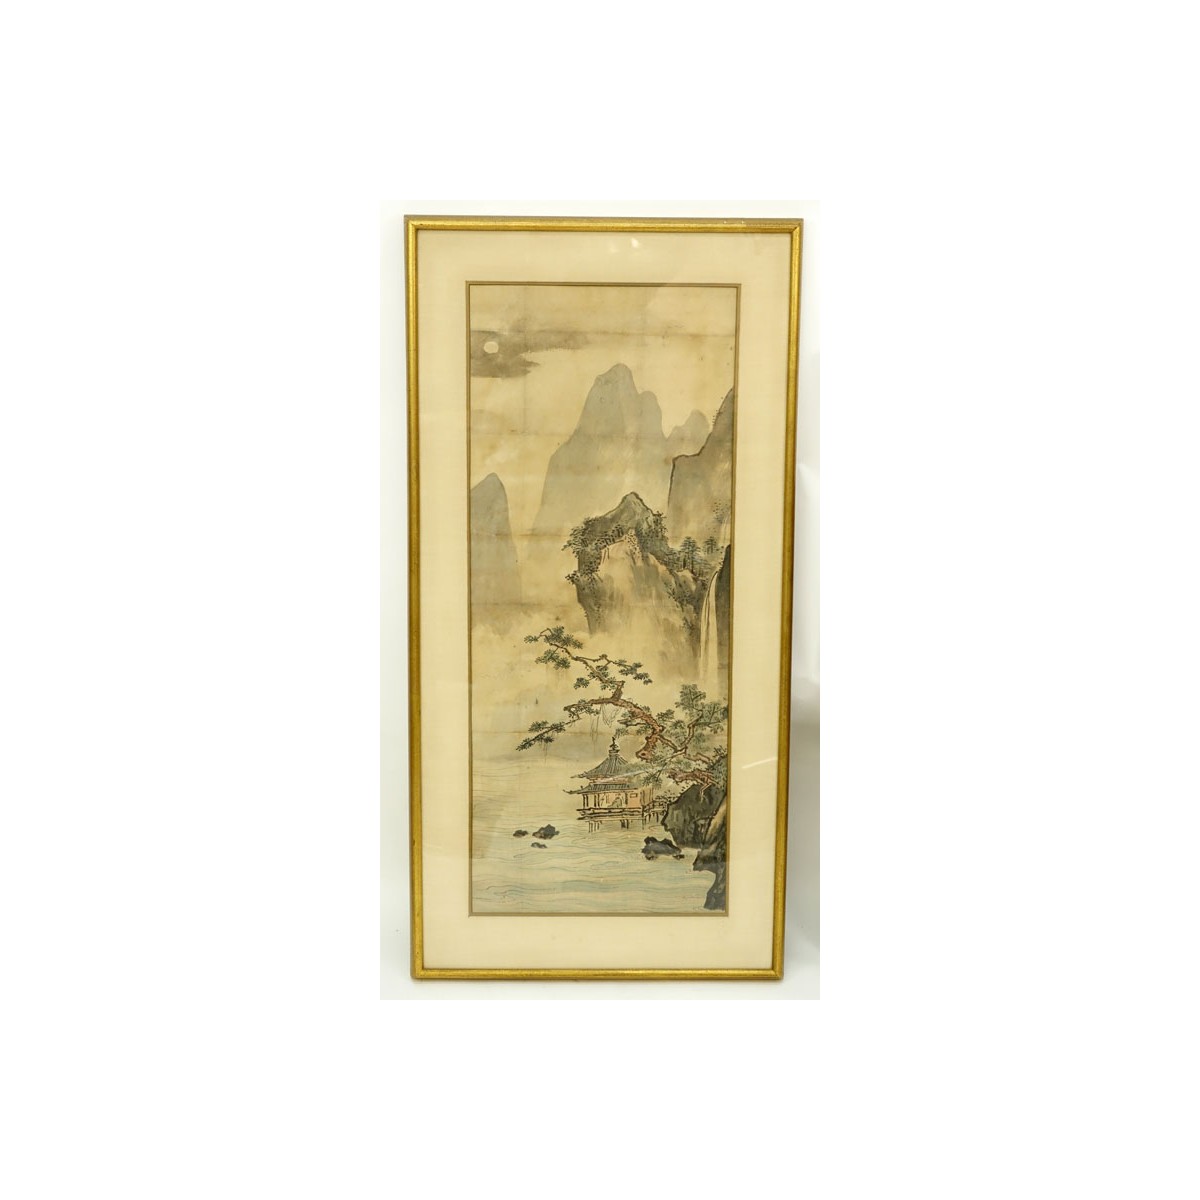 Large Antique Japanese Watercolor Scroll Painting, Landscape Scene. Toning and spotting, crease mar